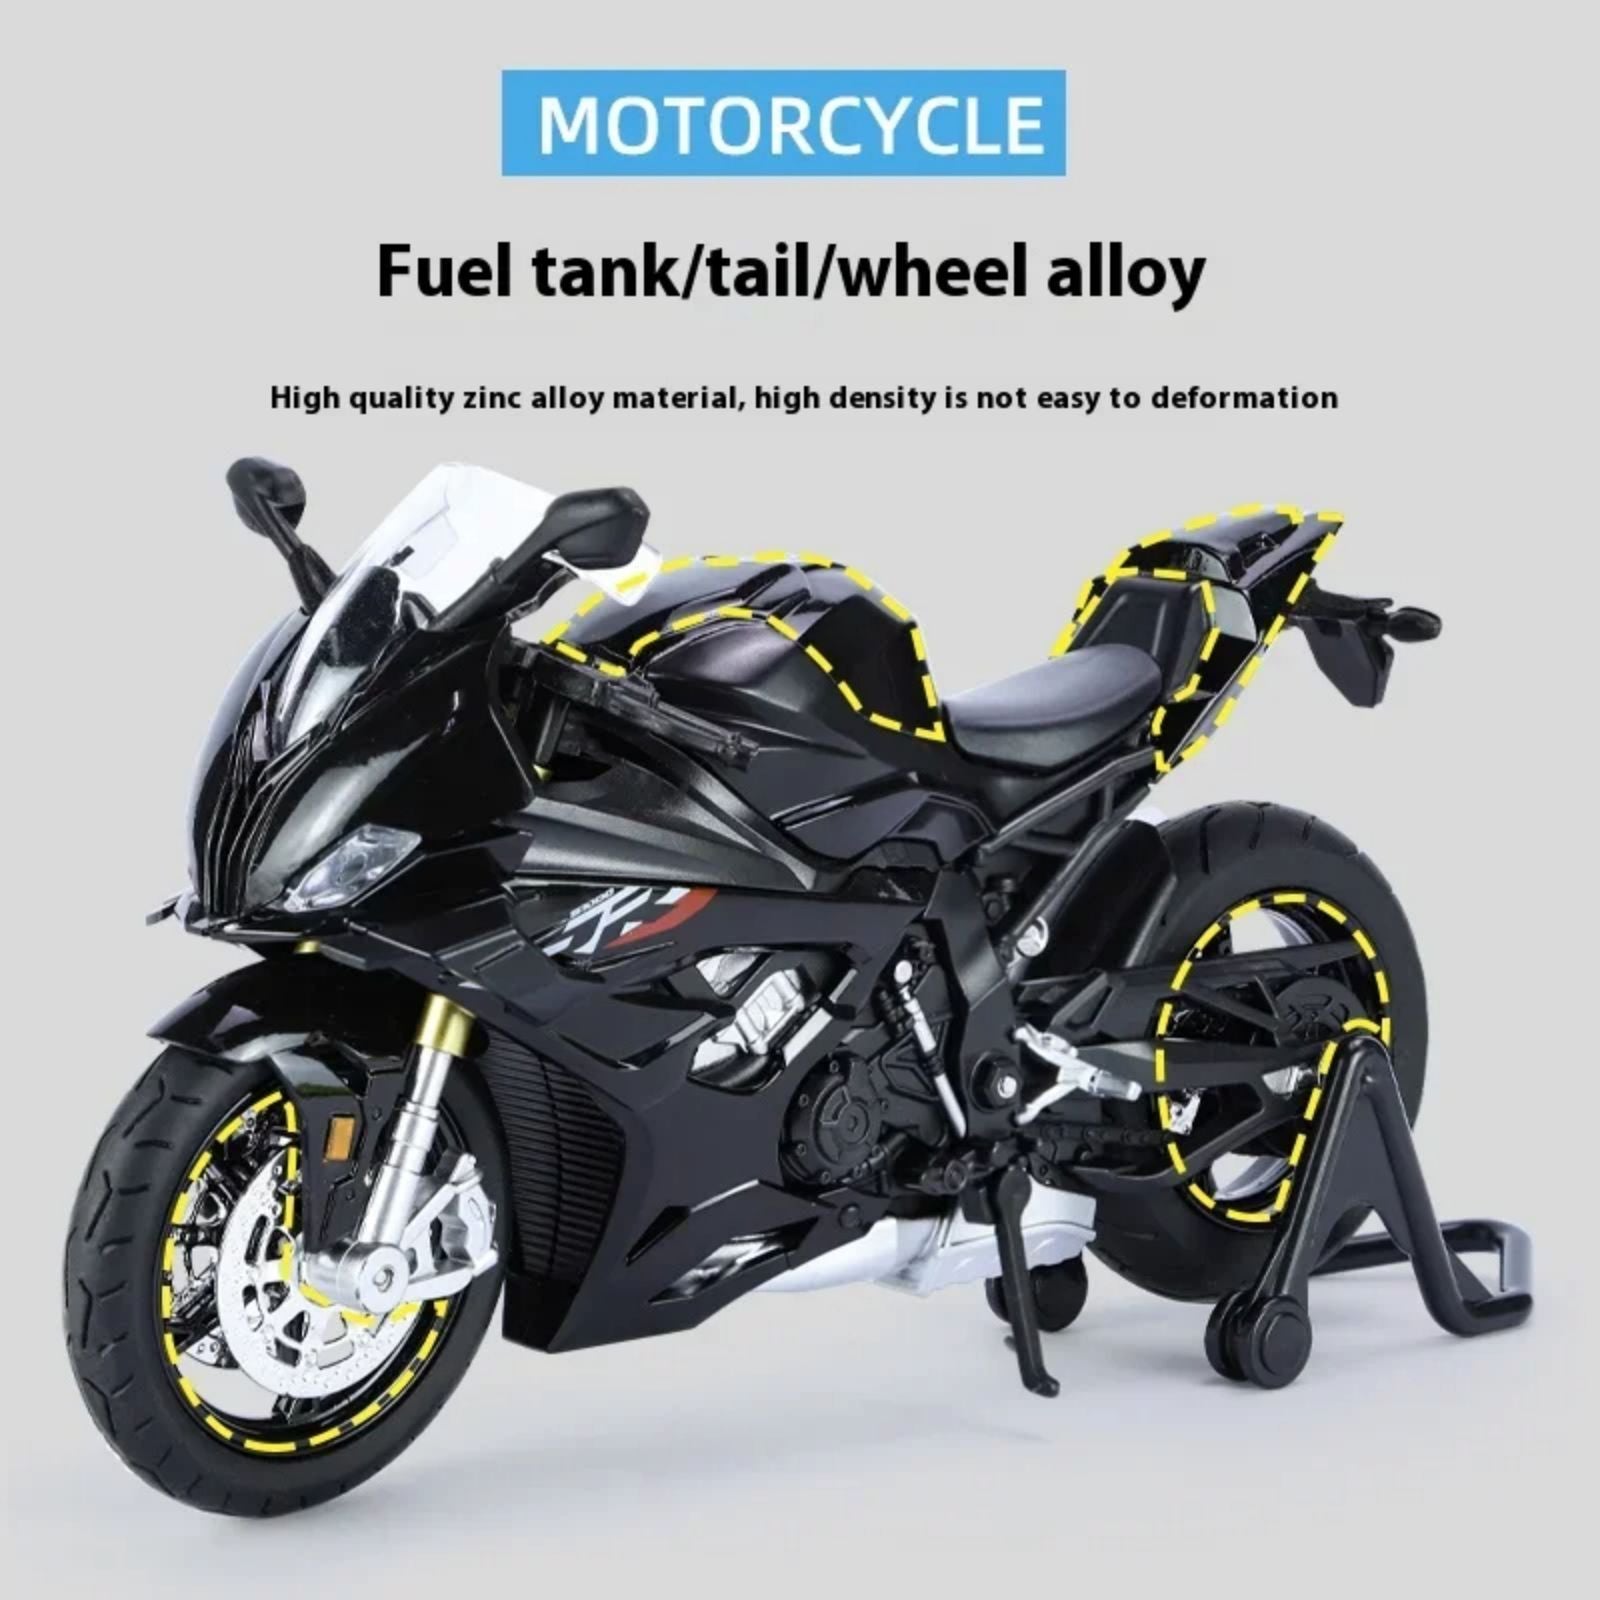 1:12 BMW RRS1000 Alloy Diecast Motorcycle Model Collect Hobbies Simulation Racing Model Super Sport Miniature Collection Gifts